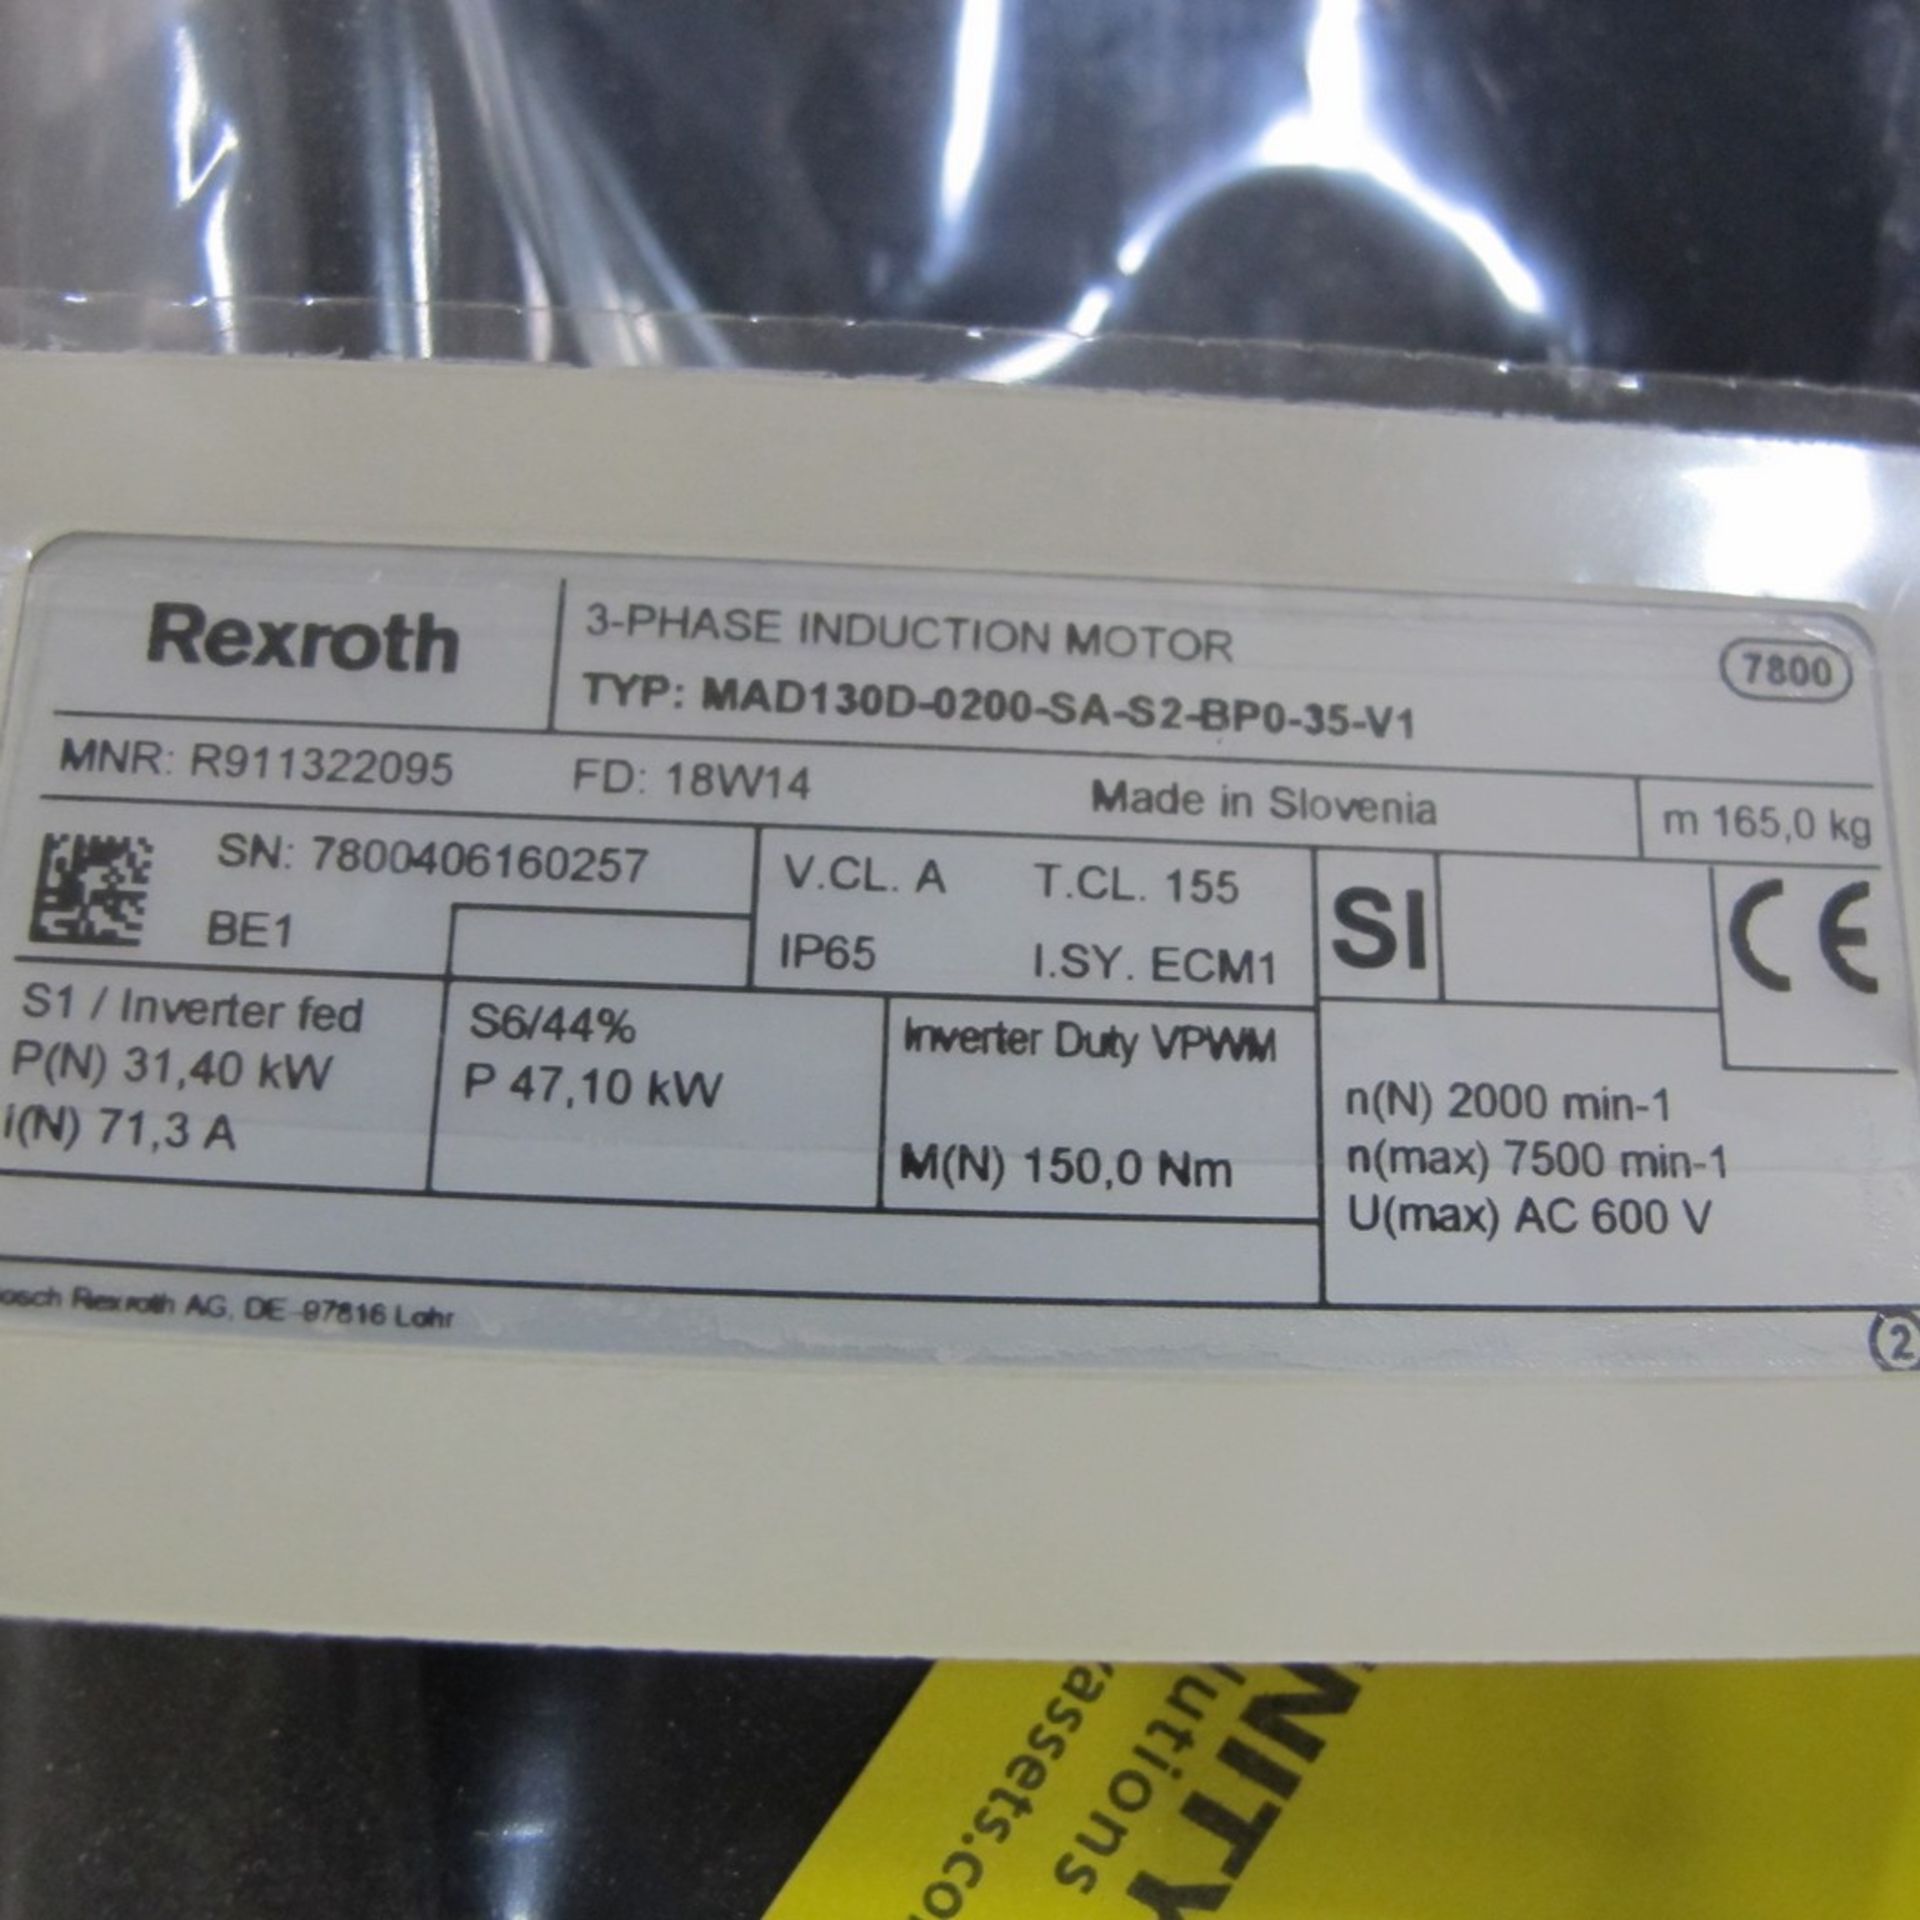 BOSCH REXROTH INDRADYN MOTOR, 3 PHASE INDUCTION MOTOR, TYPE MAD130D-150-0200-SA-S2-BP0-35-V1, AC600V - Image 3 of 3